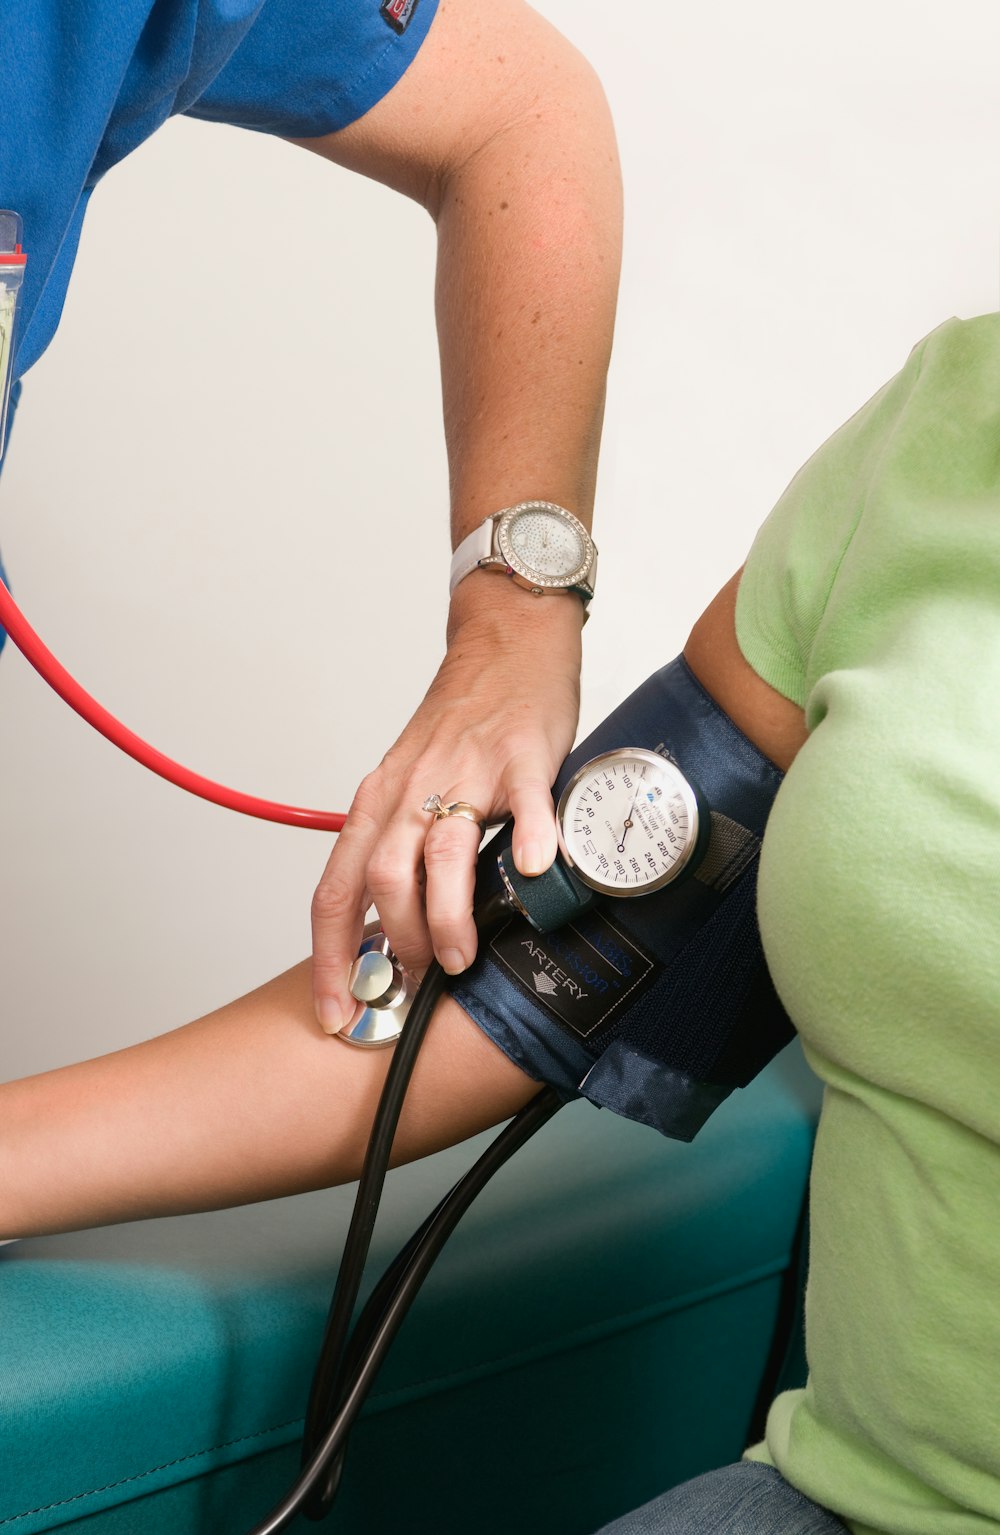 a person with a blood pressure meter on their arm